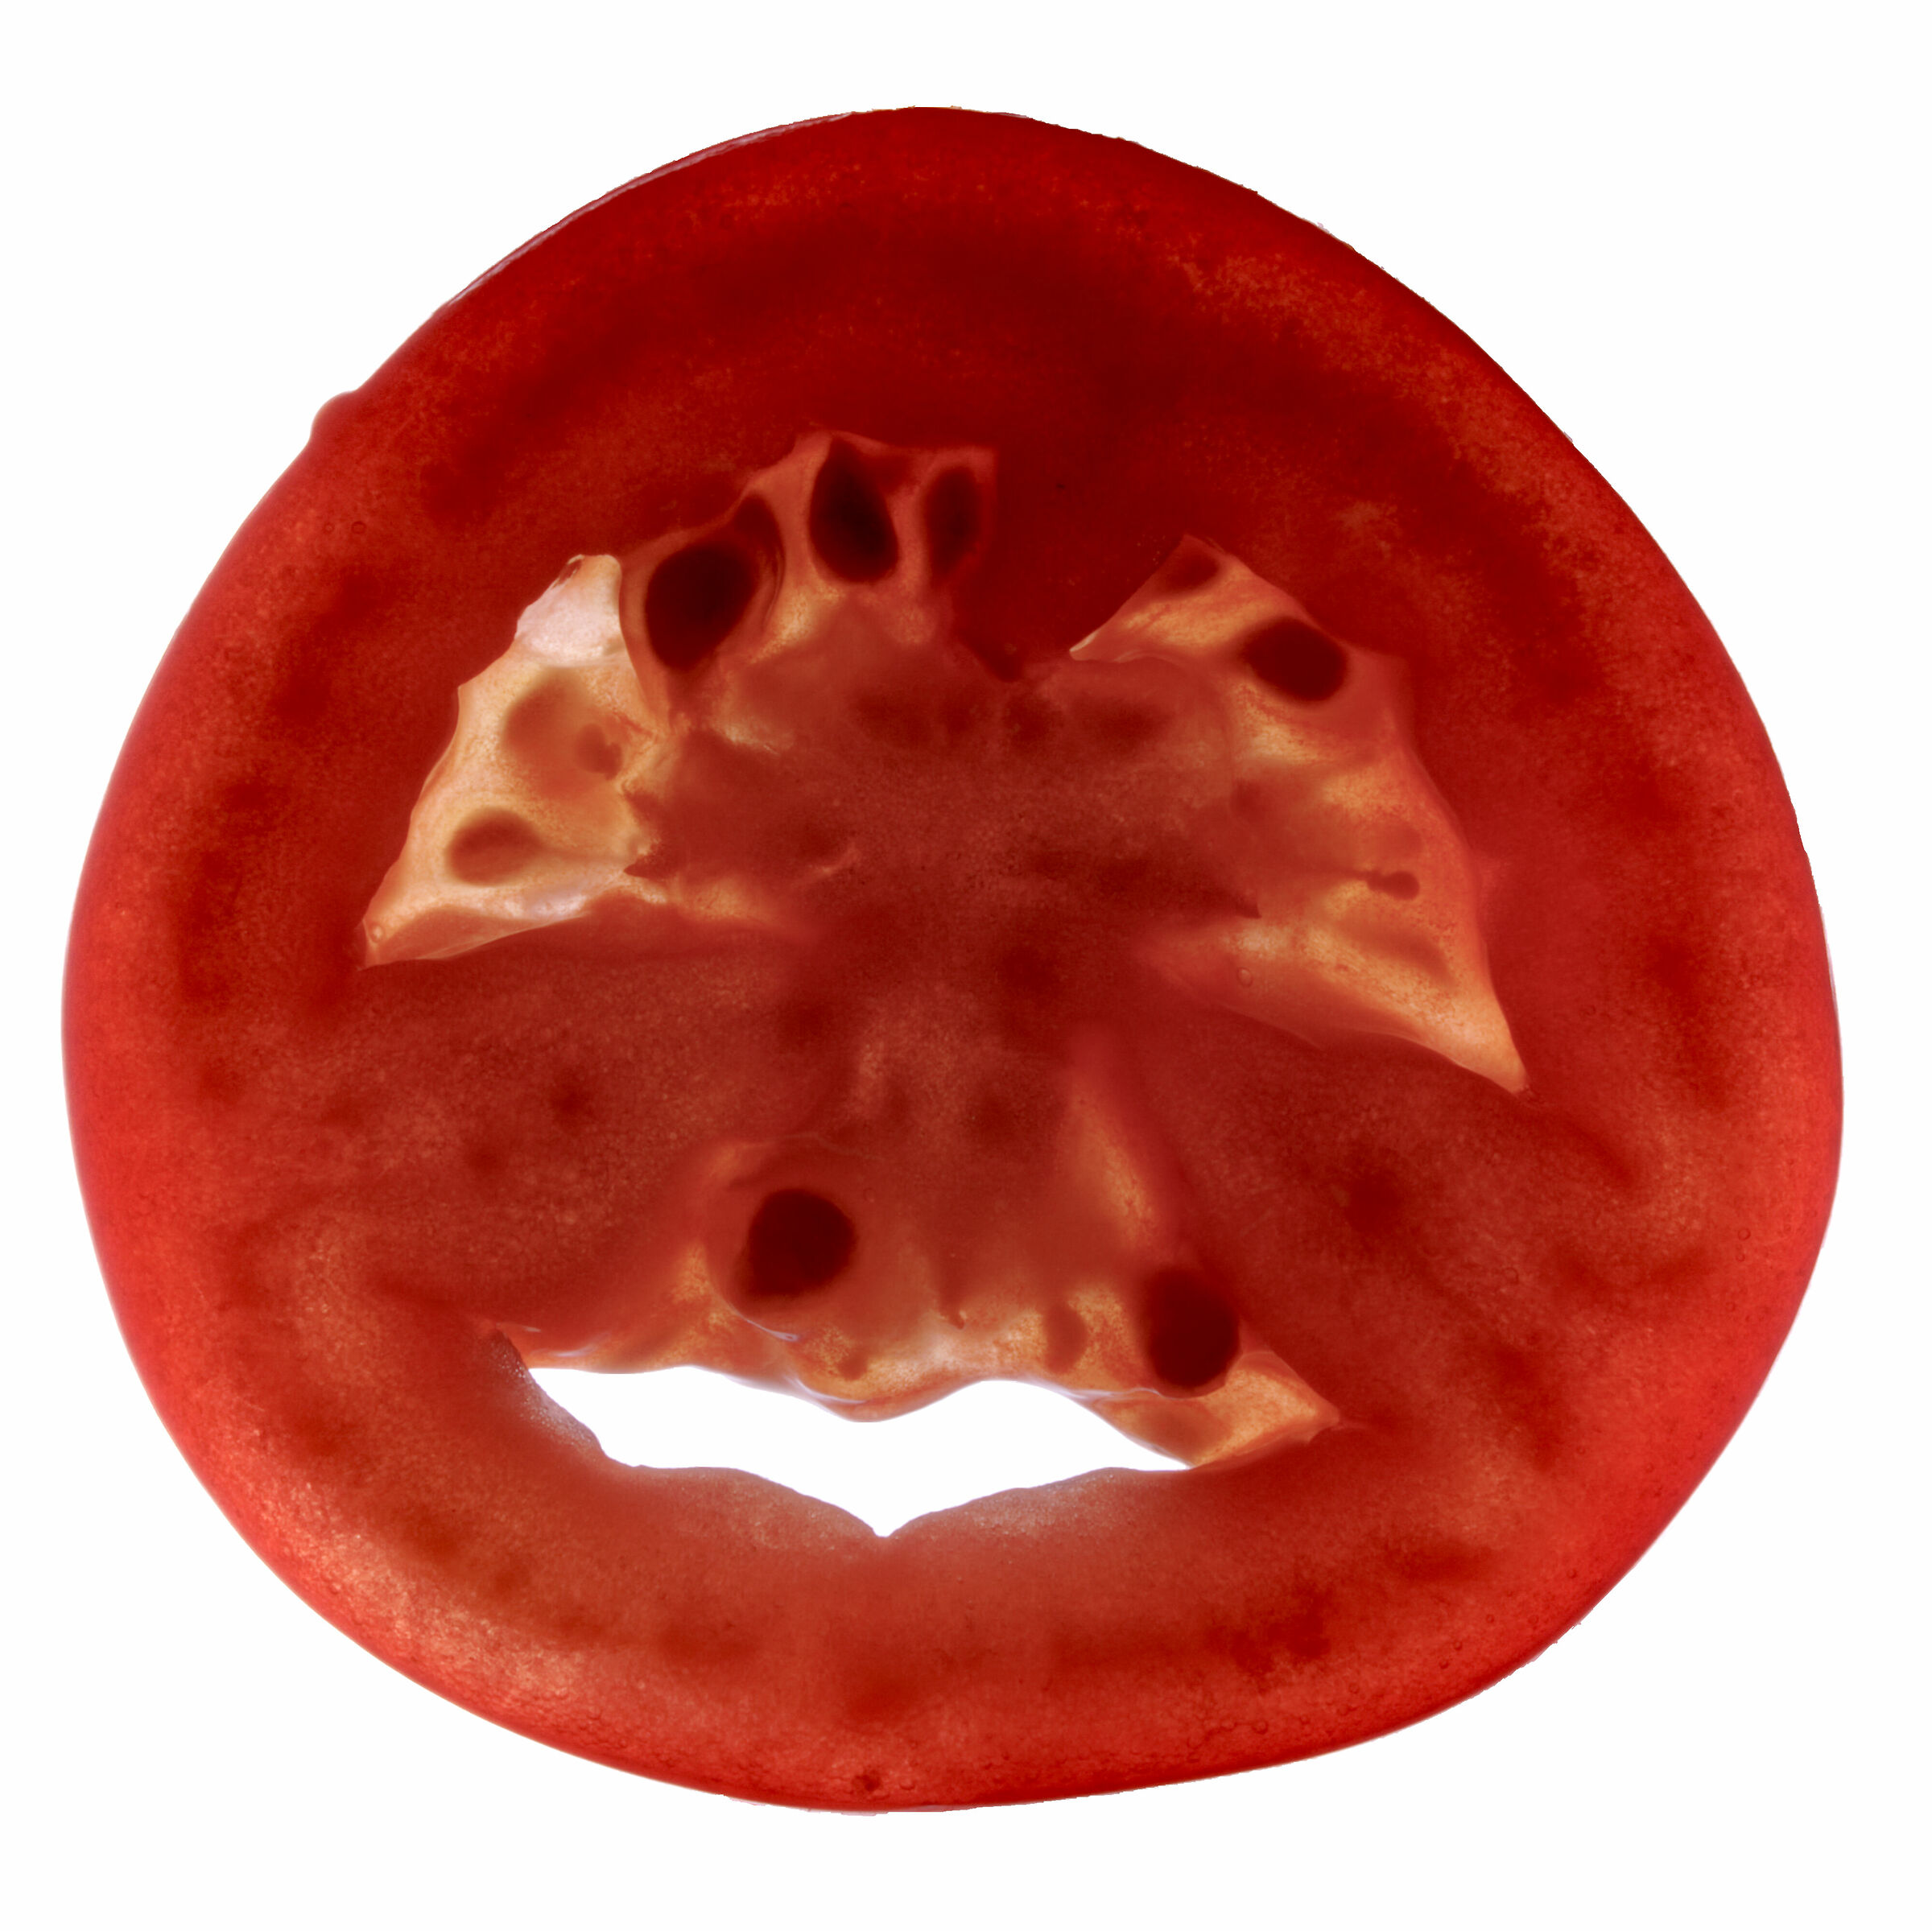 tomato in transparency...